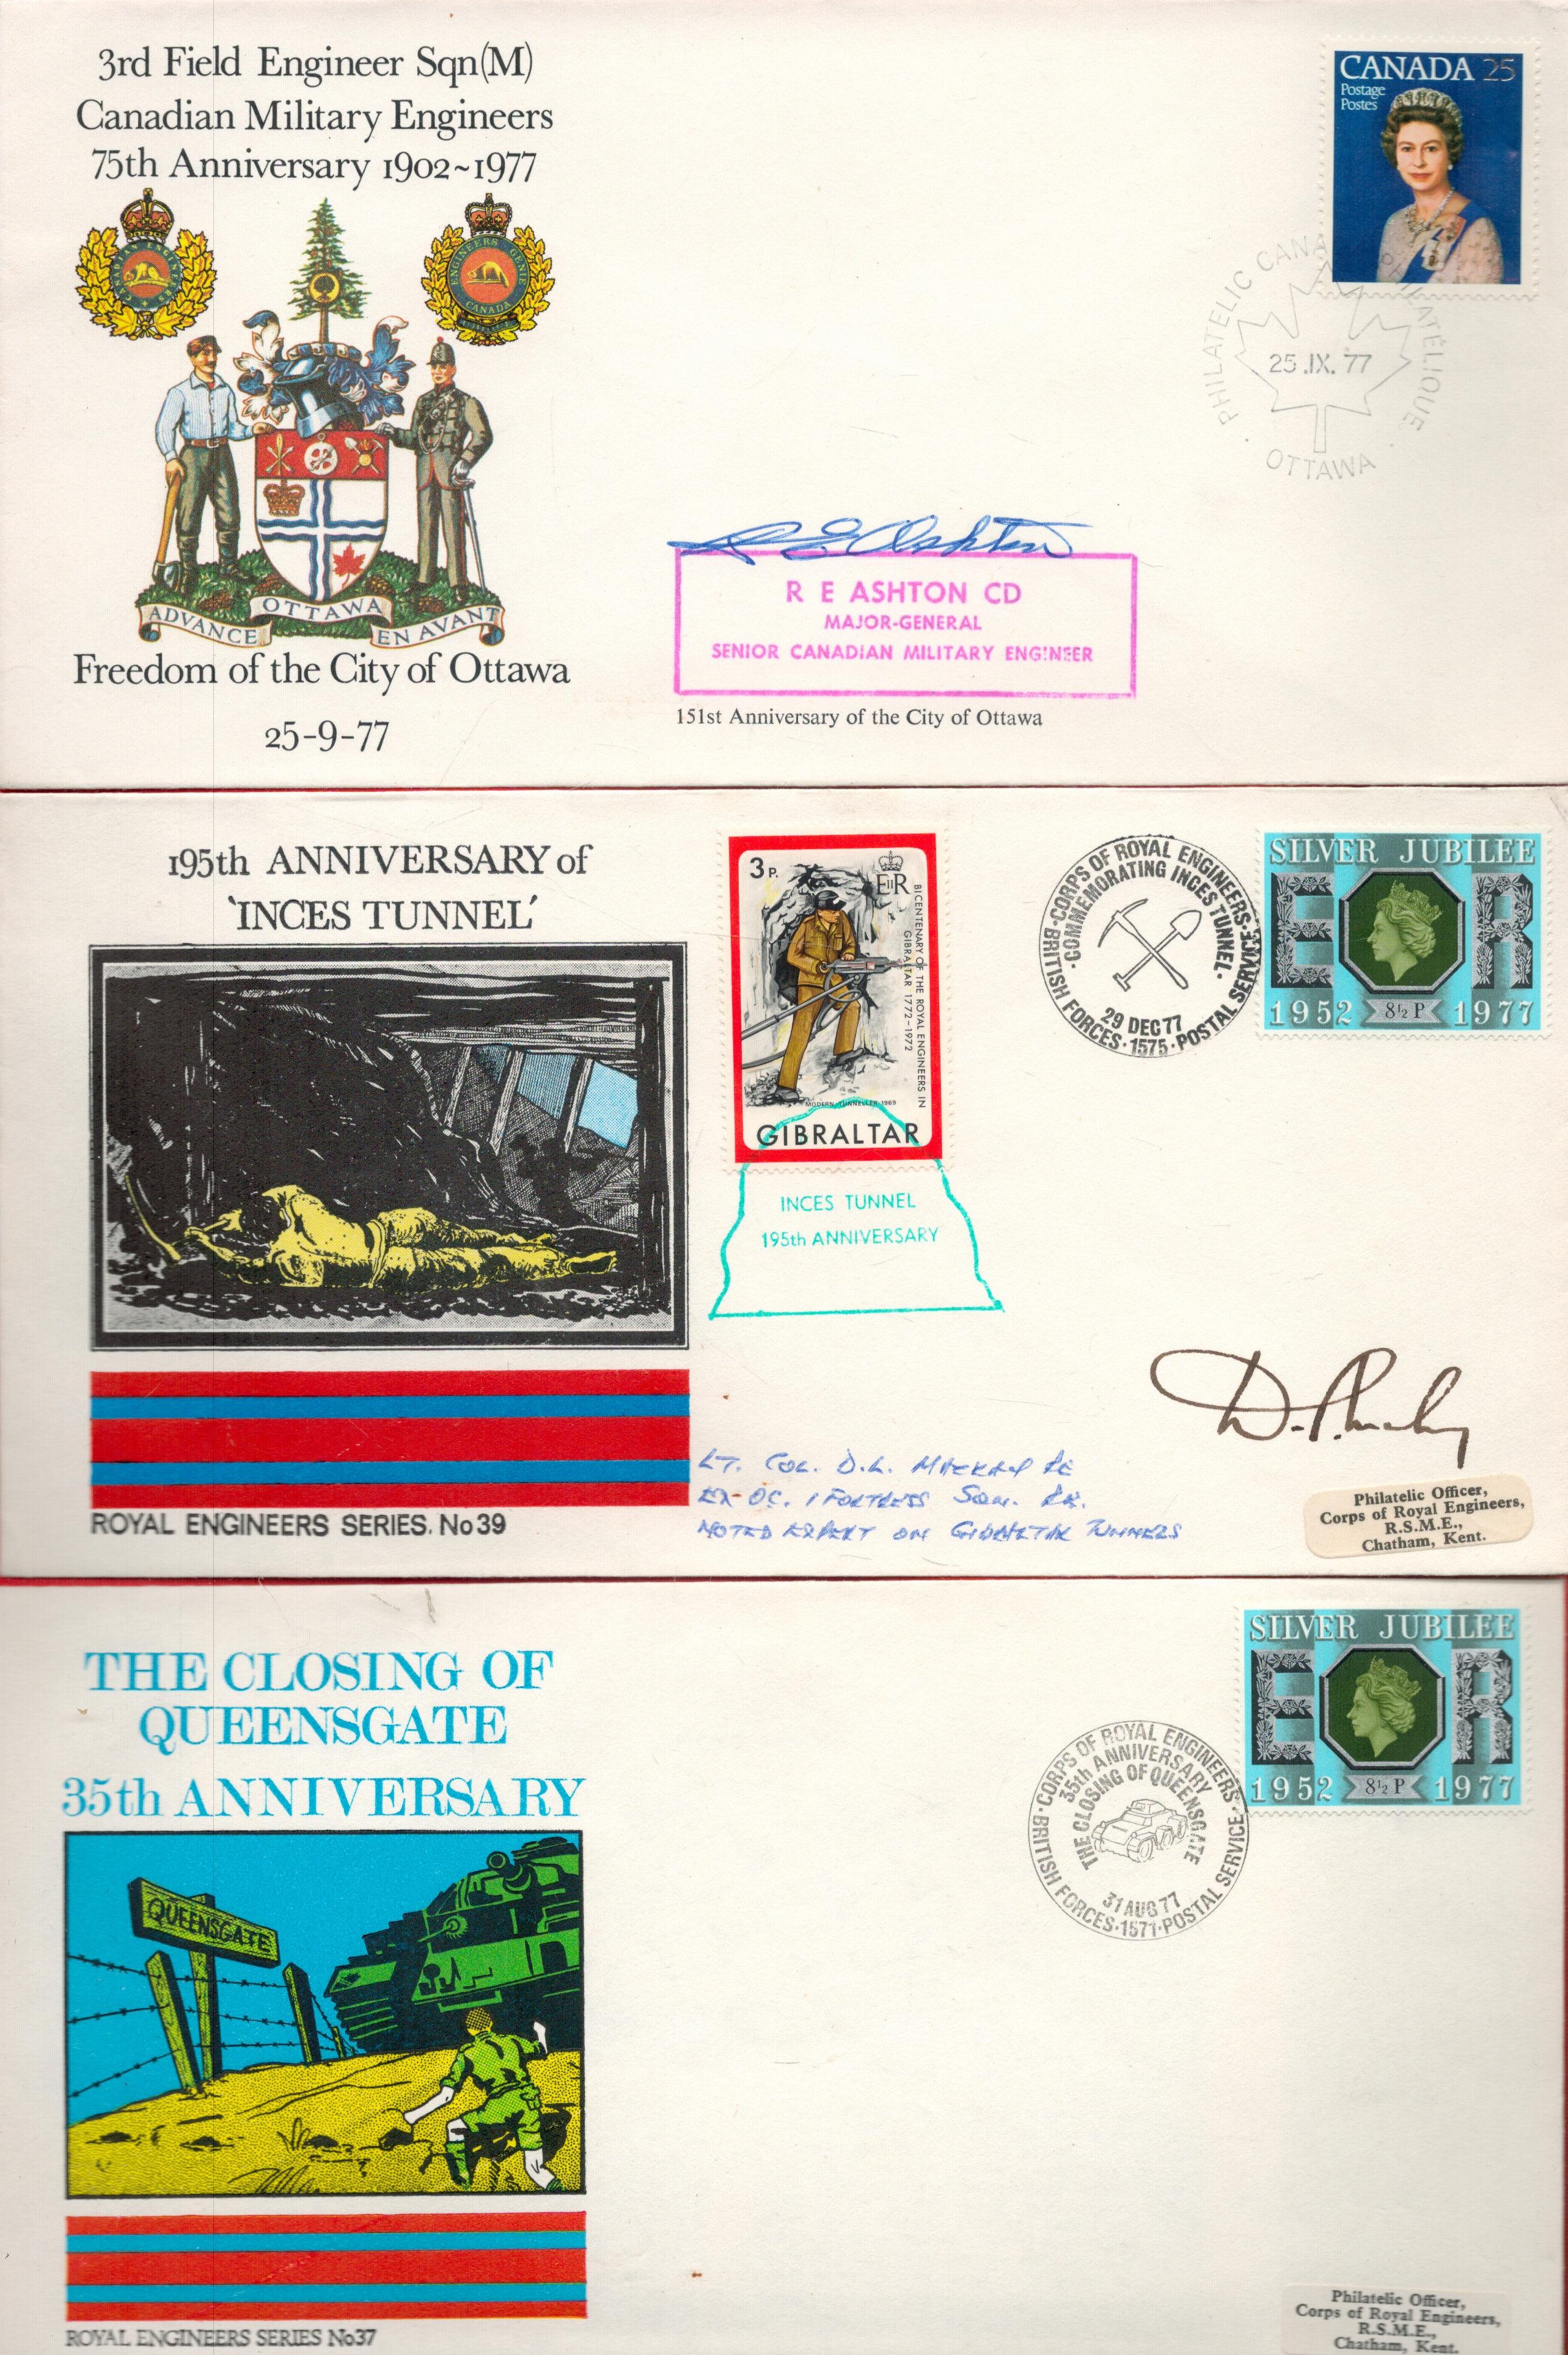 Collection of 3 Royal Engineer Series Covers, Two Signed by Major General RE Ashton and Lt Colonel